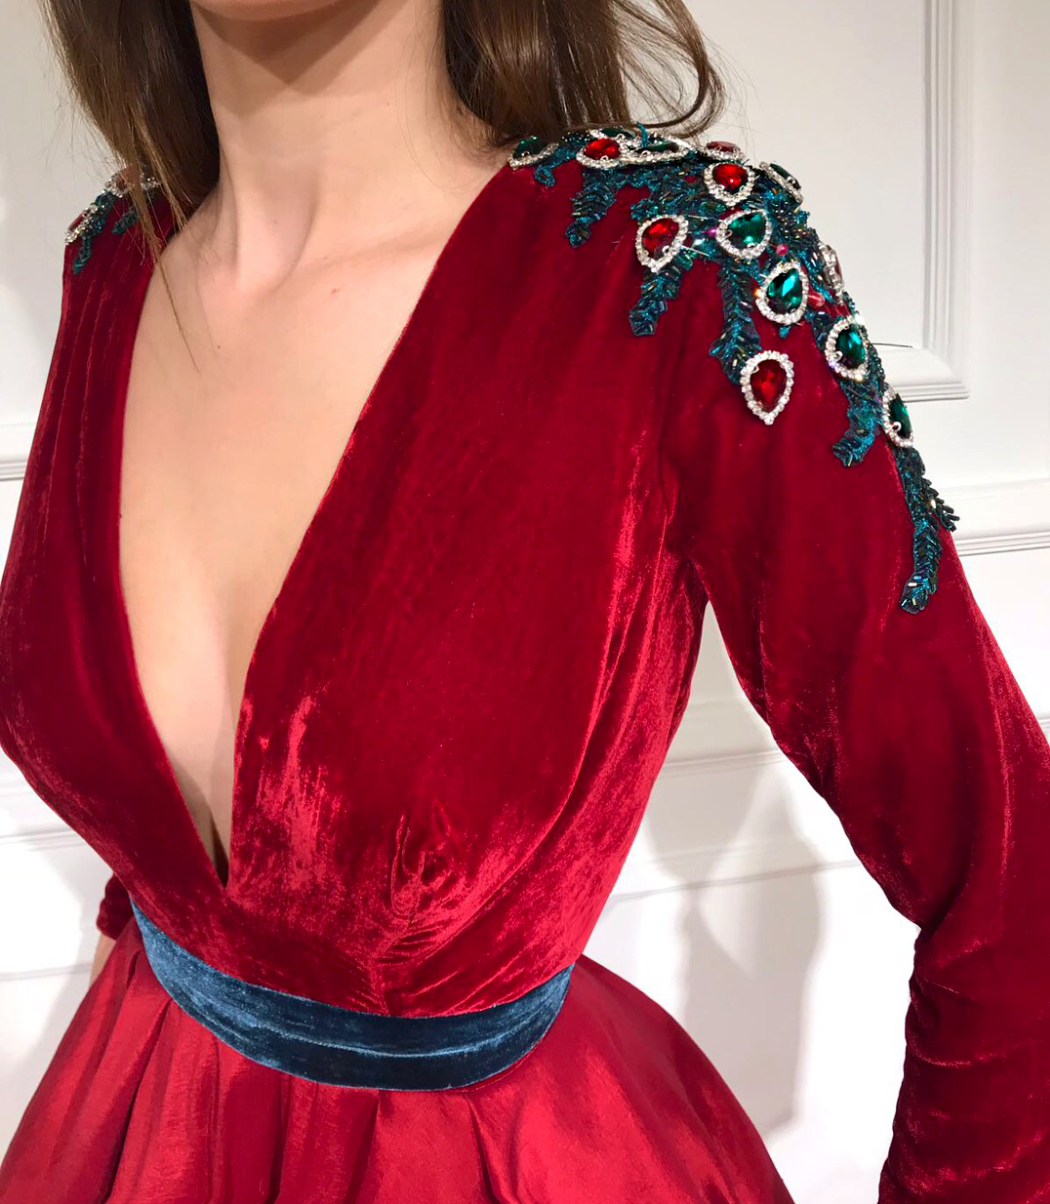 Red A-Line dress with v-neck, long sleeves and embroidery